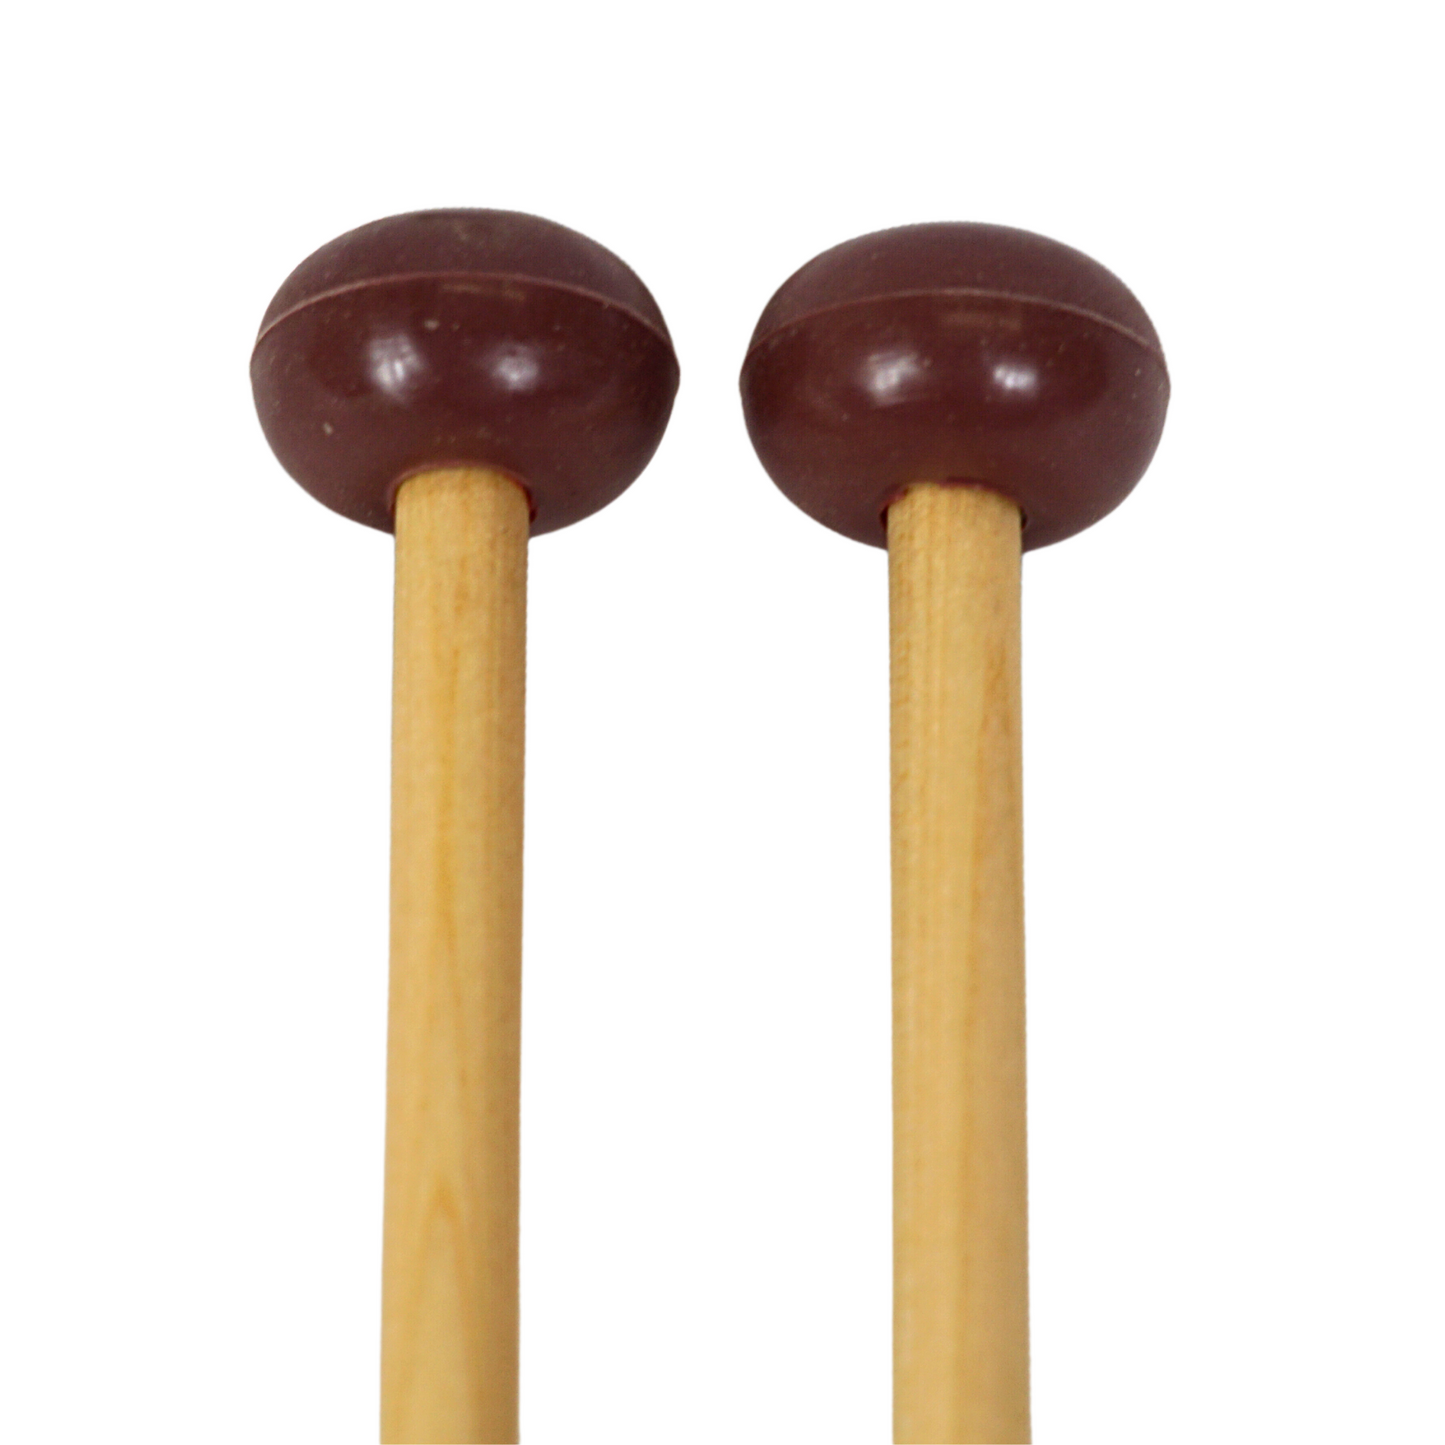 GMP Xylophone/Bell Mallets, Soft, Brown pair - MAL-XM15-BR